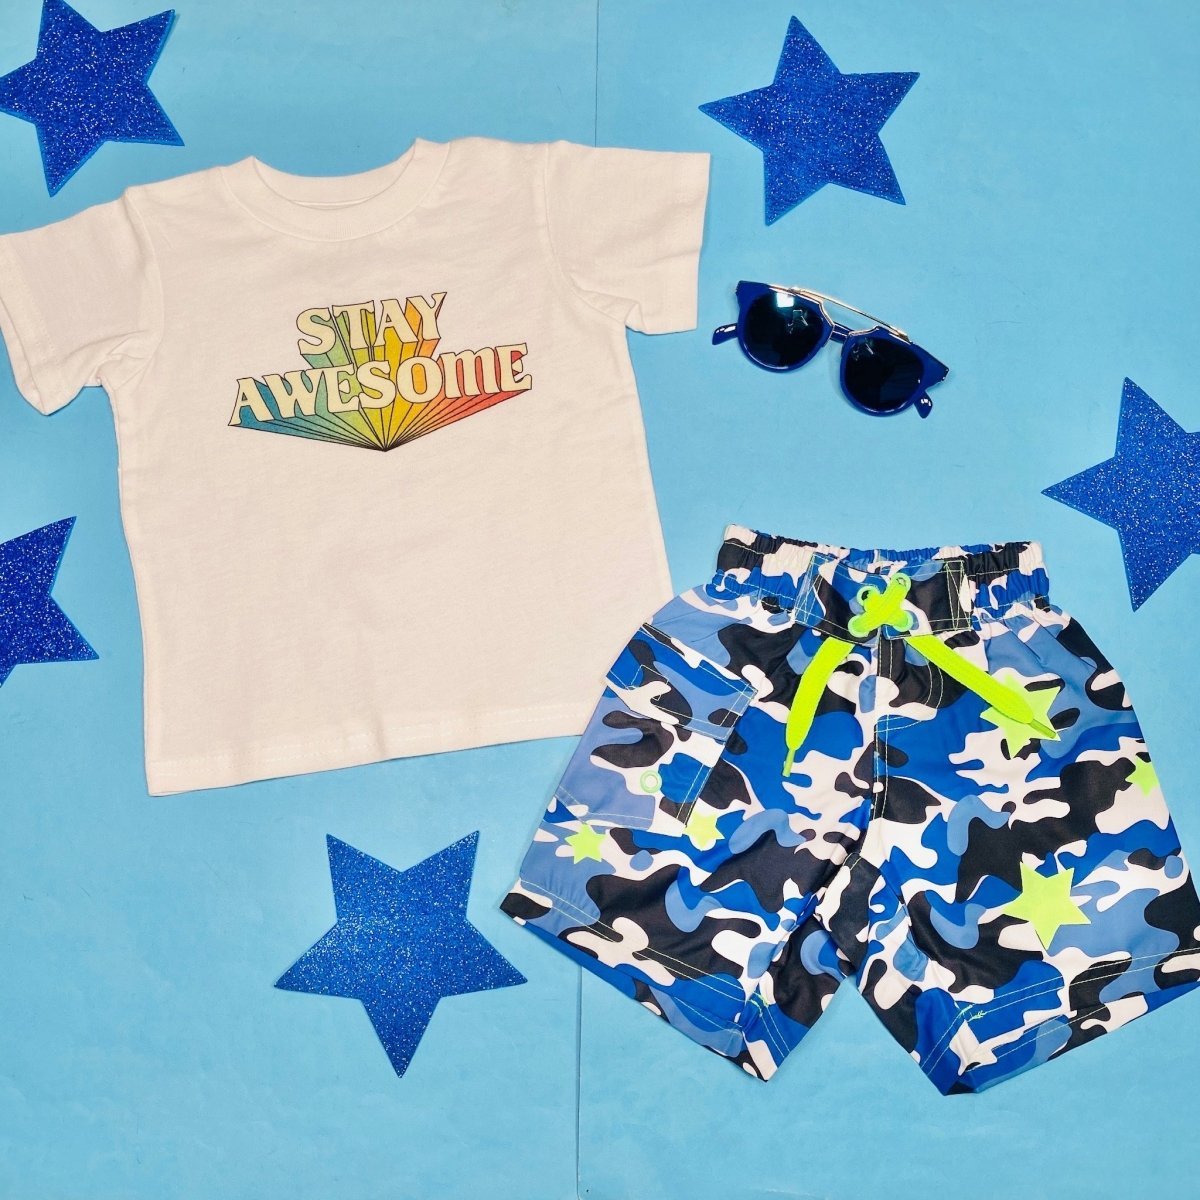 STAY AWESOME TSHIRT - SHORT SLEEVE TOPS